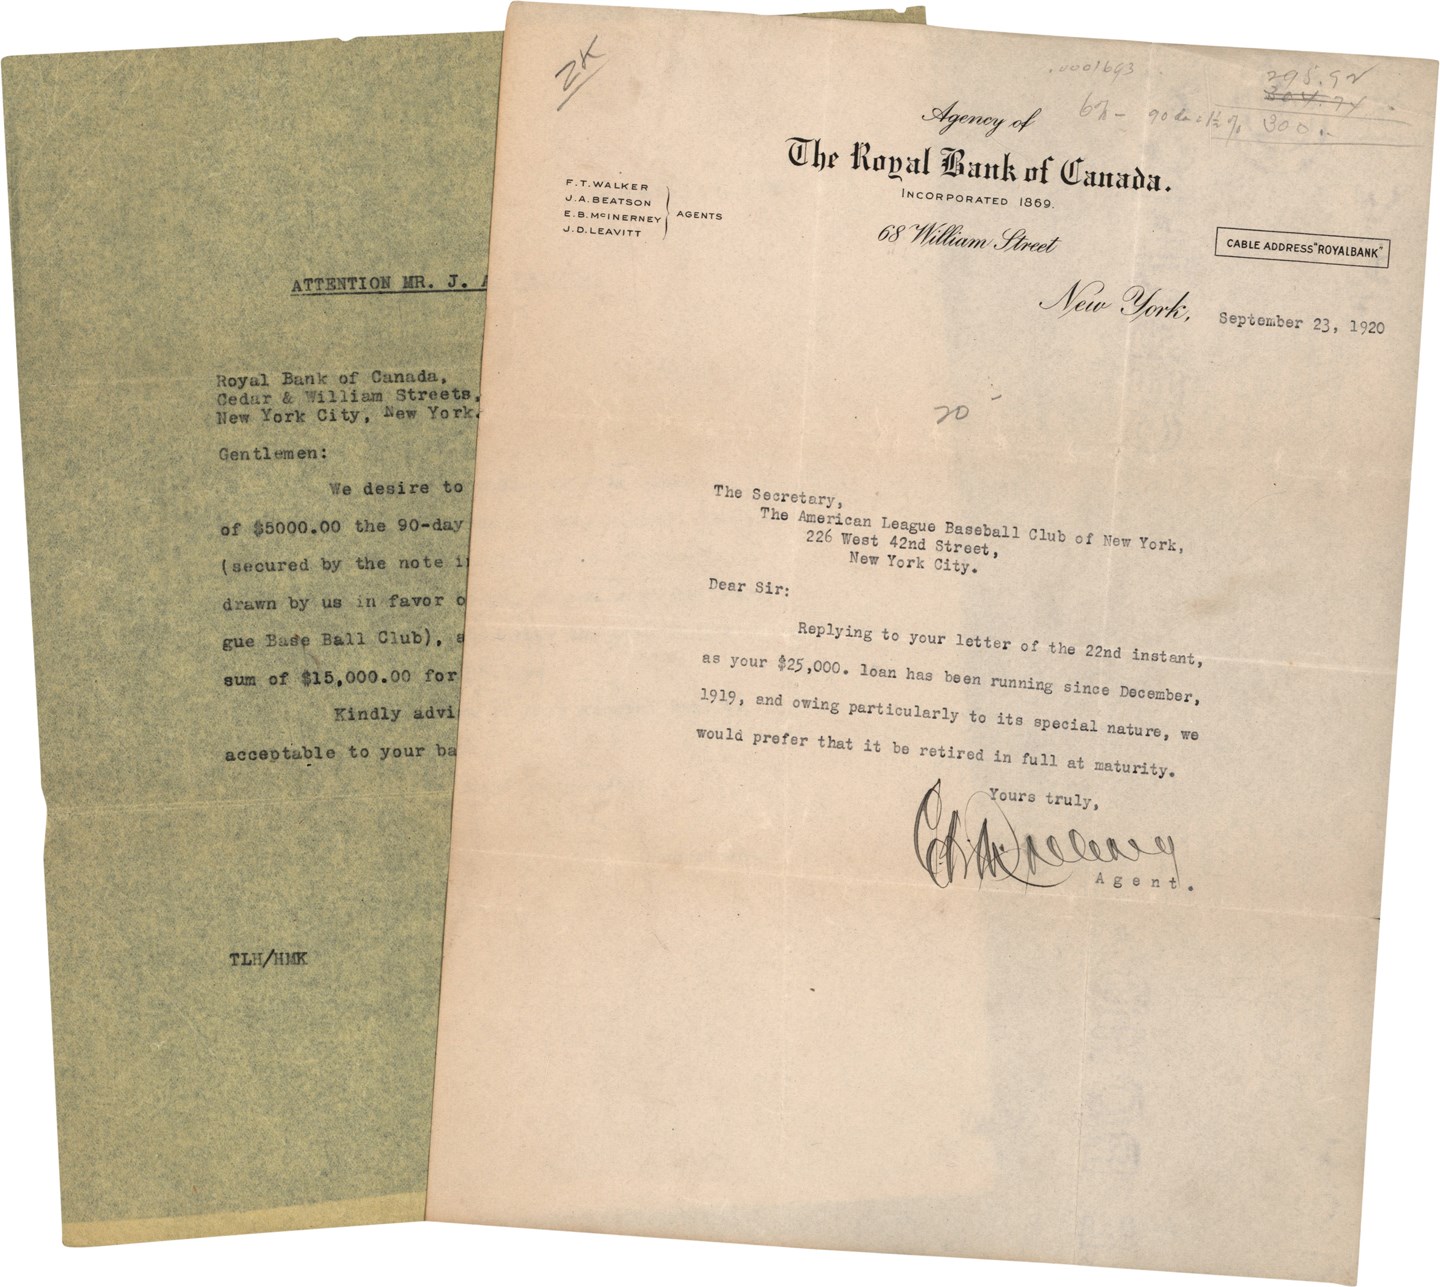 The Babe Ruth Sale Archive - September 1920 Colonel Huston is Denied a Renewal of Note Payment Regarding Babe Ruth Sale (ex-Barry Halper Collection)